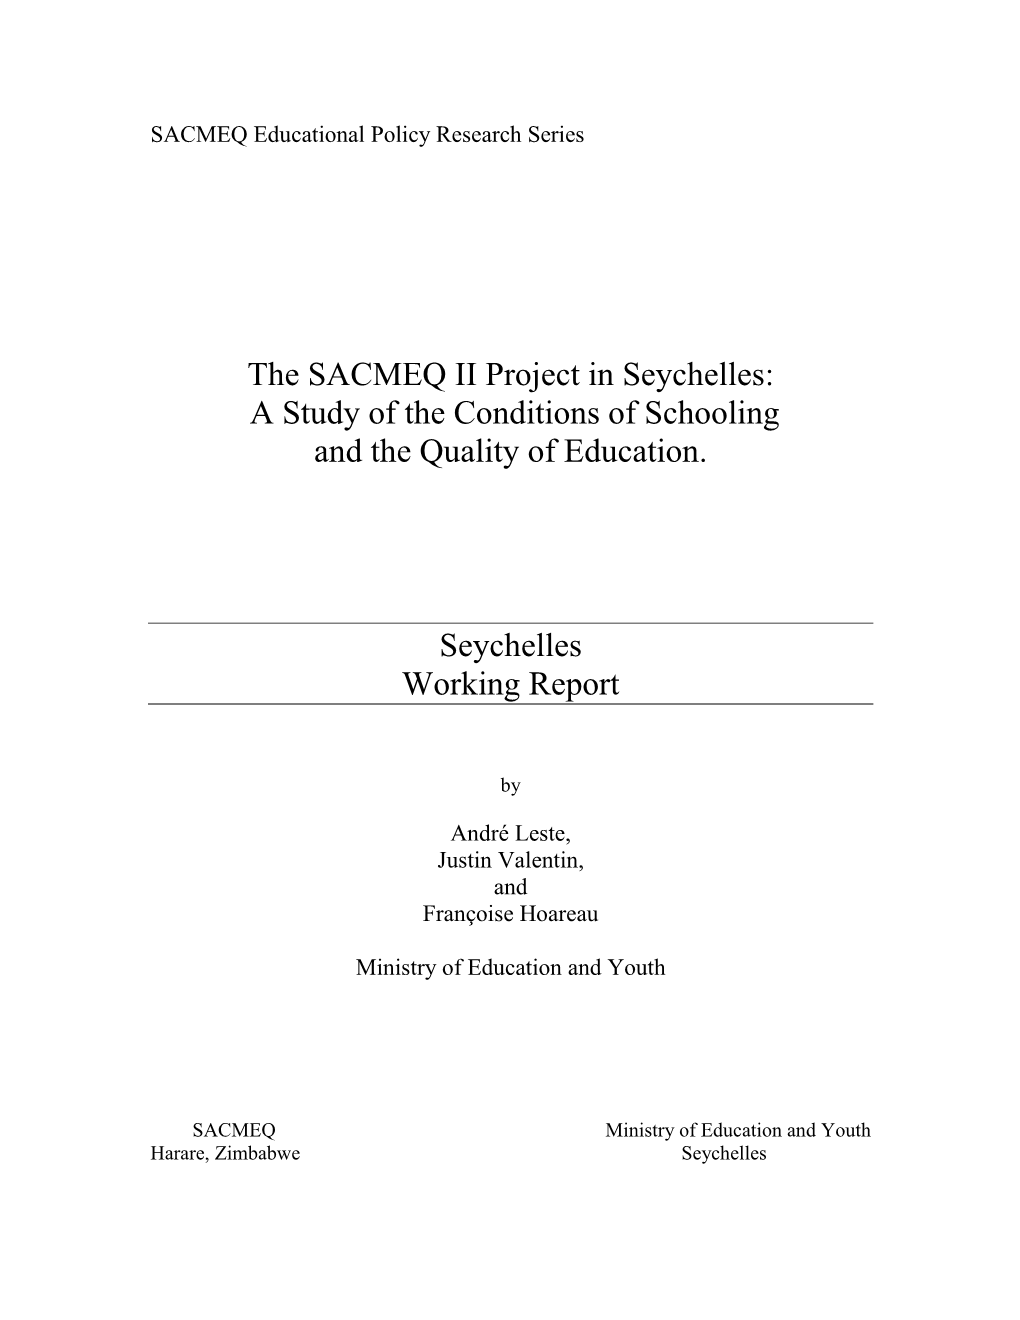 The SACMEQ II Project in Seychelles: a Study of the Conditions of Schooling and the Quality of Education